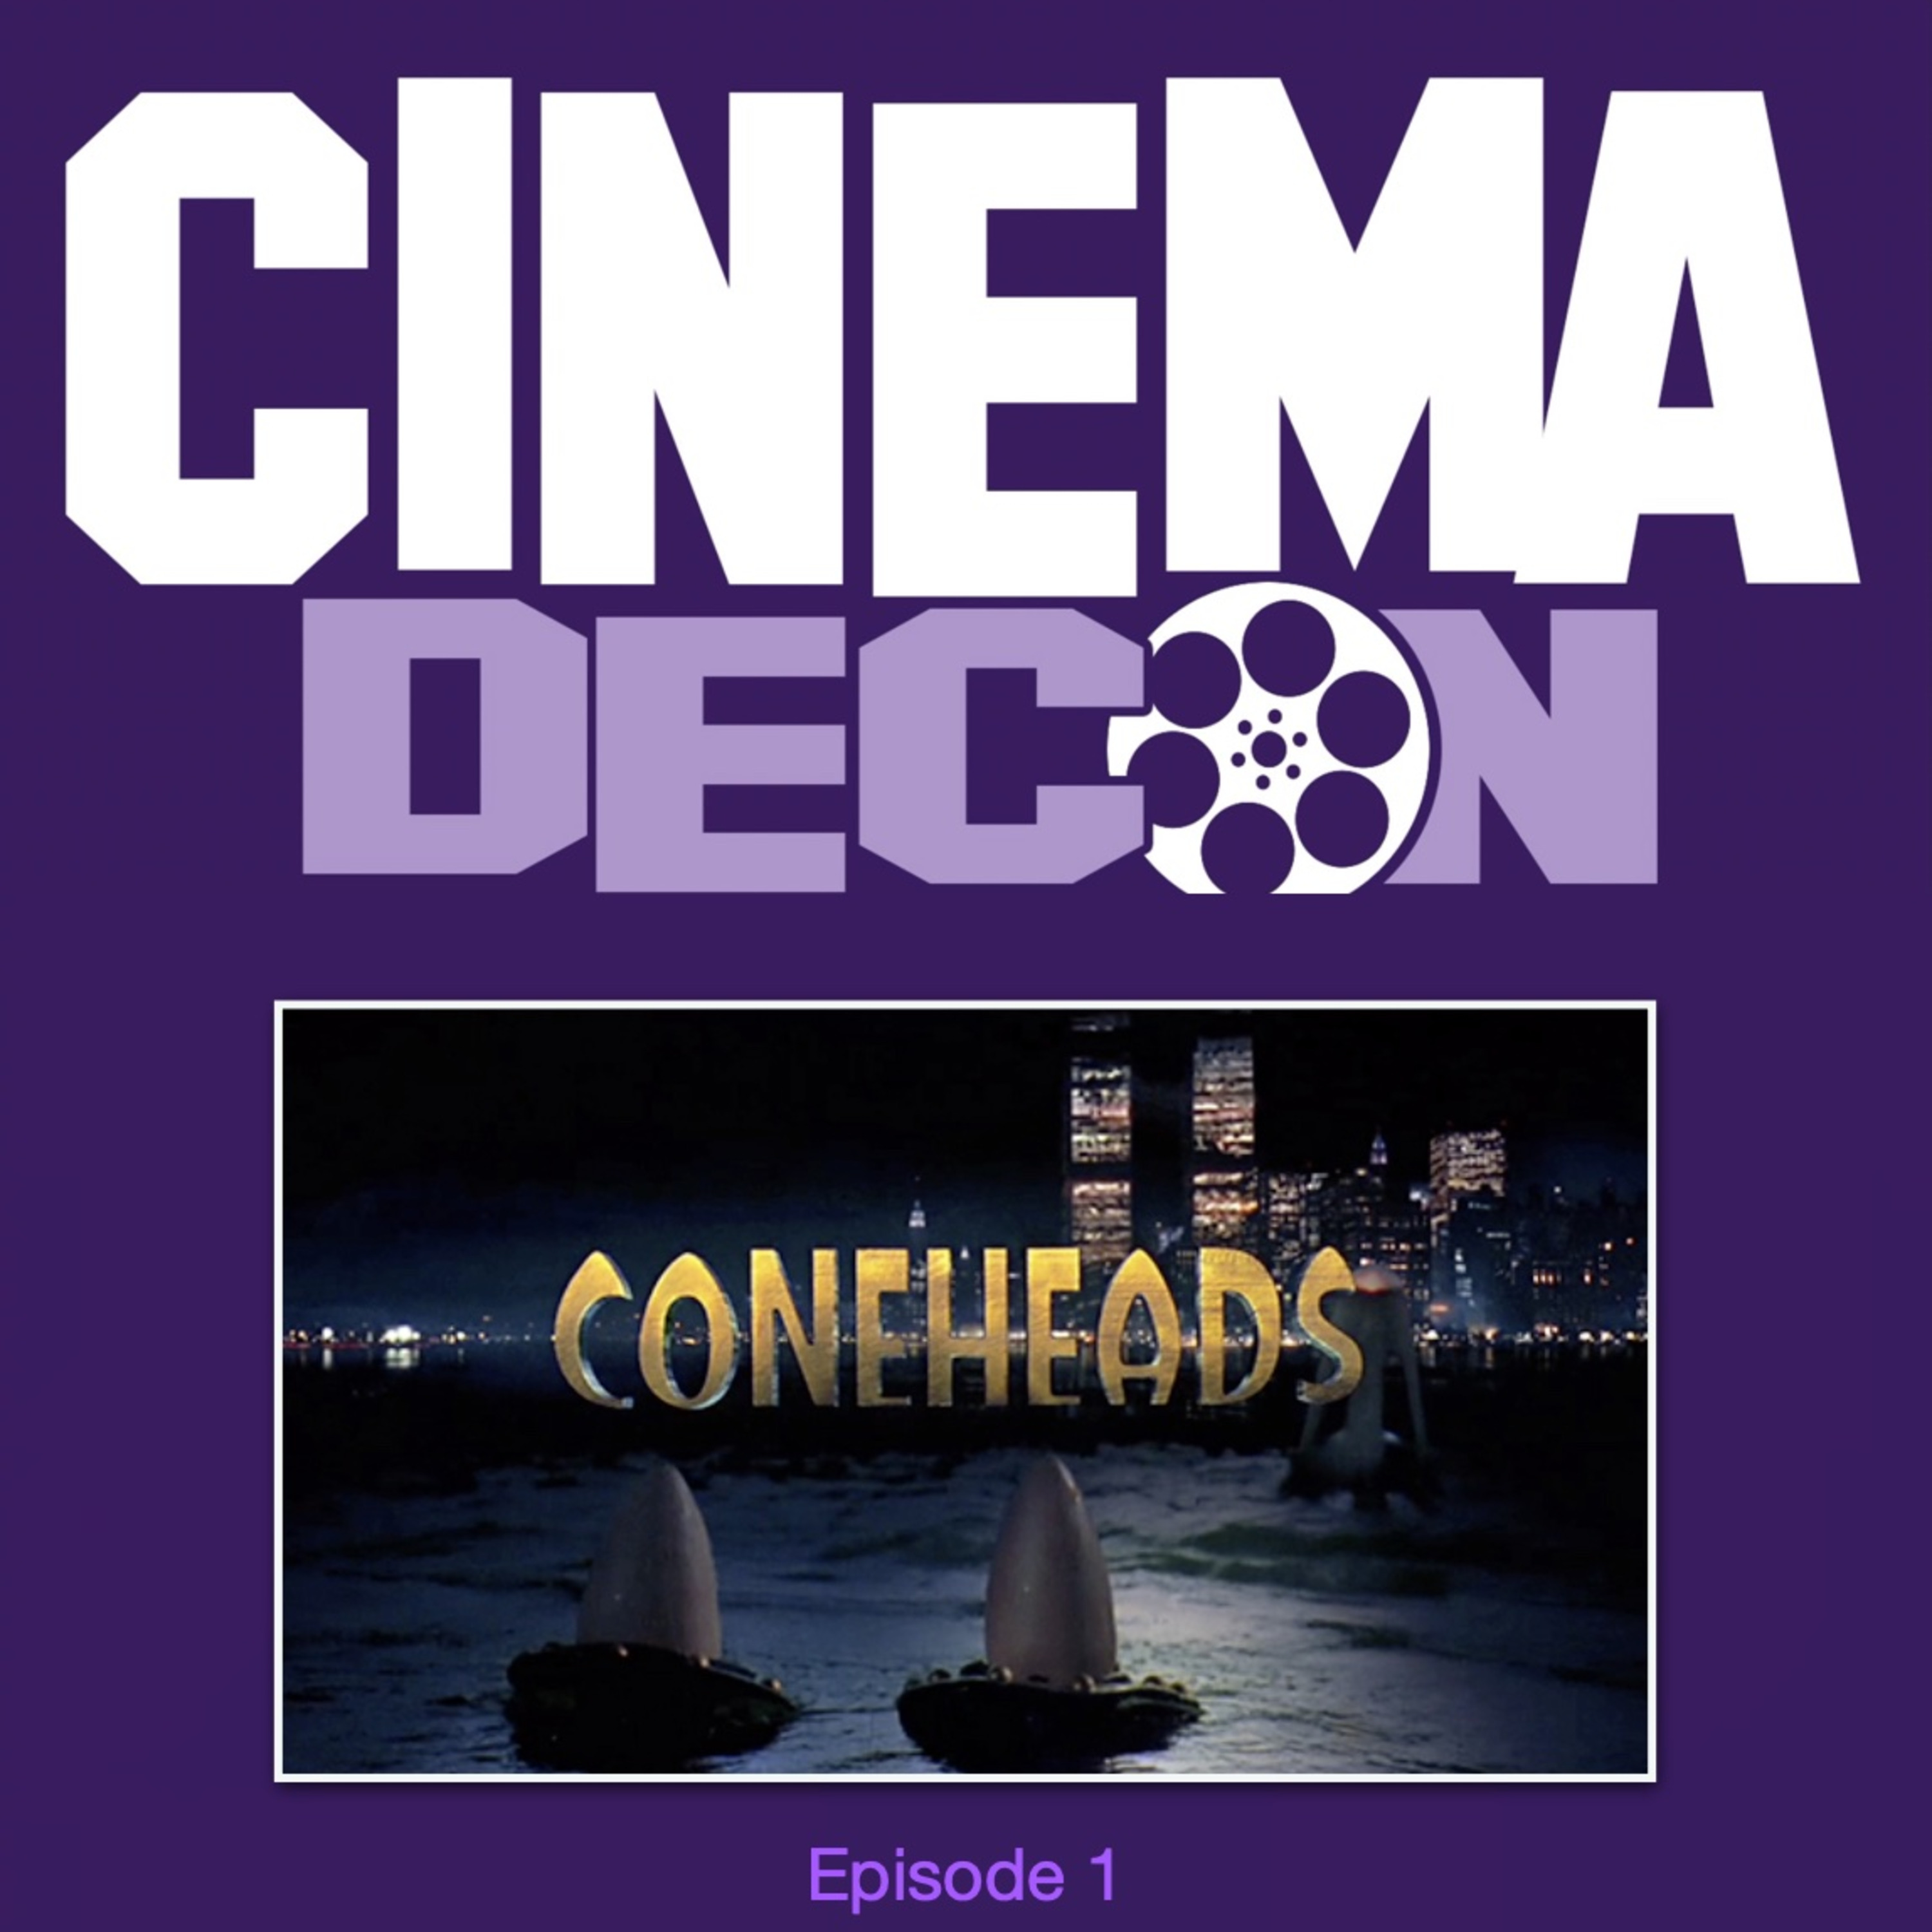 Episode 1: Coneheads (1993) - Movie Review and Analysis